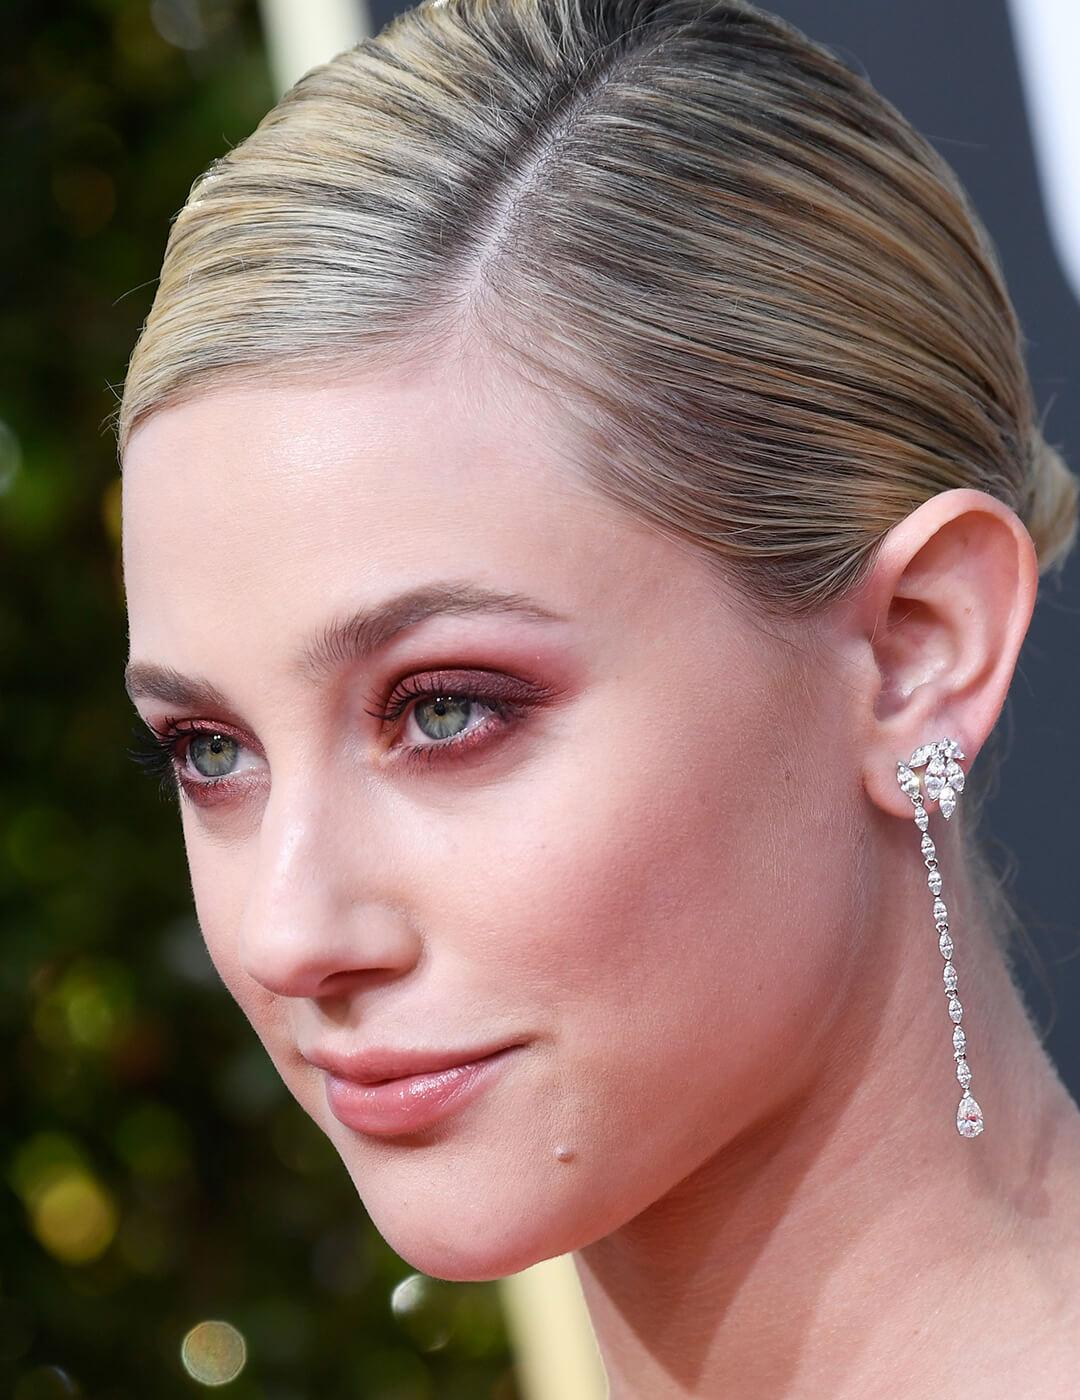 Close-up of Lili Reinhart rocking a slick back hairstyle, soft red smoky eye makeup, and silver dangling earrings